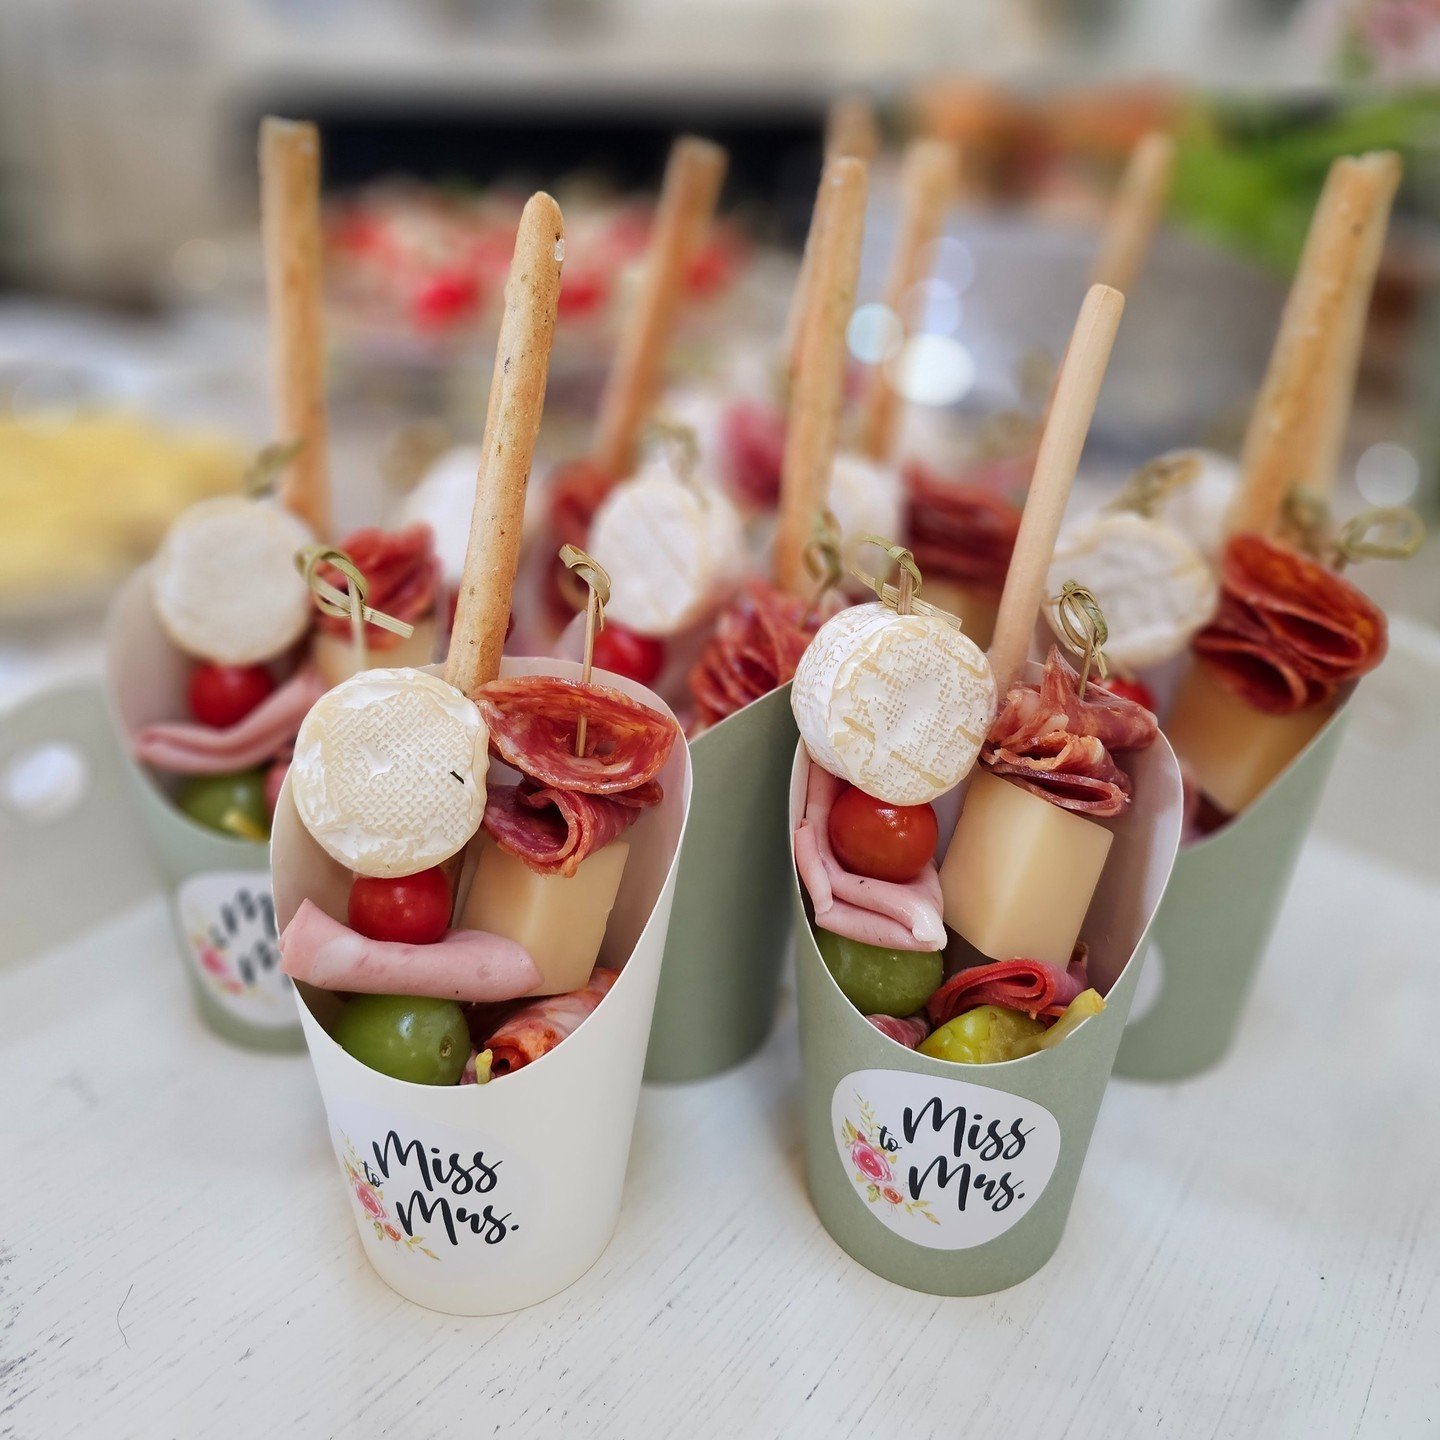 Charcuterie boards are SOOOO 2023... Let us introduce Charcuterie cups! 
We LOVE anything handheld on a stick!

📱858-405-5372
📍San Diego, CA
💻busybeecookforme.com
.
#busybeesd #catering #personalchef #foodies #sandiego #events #weddings #socal #ar